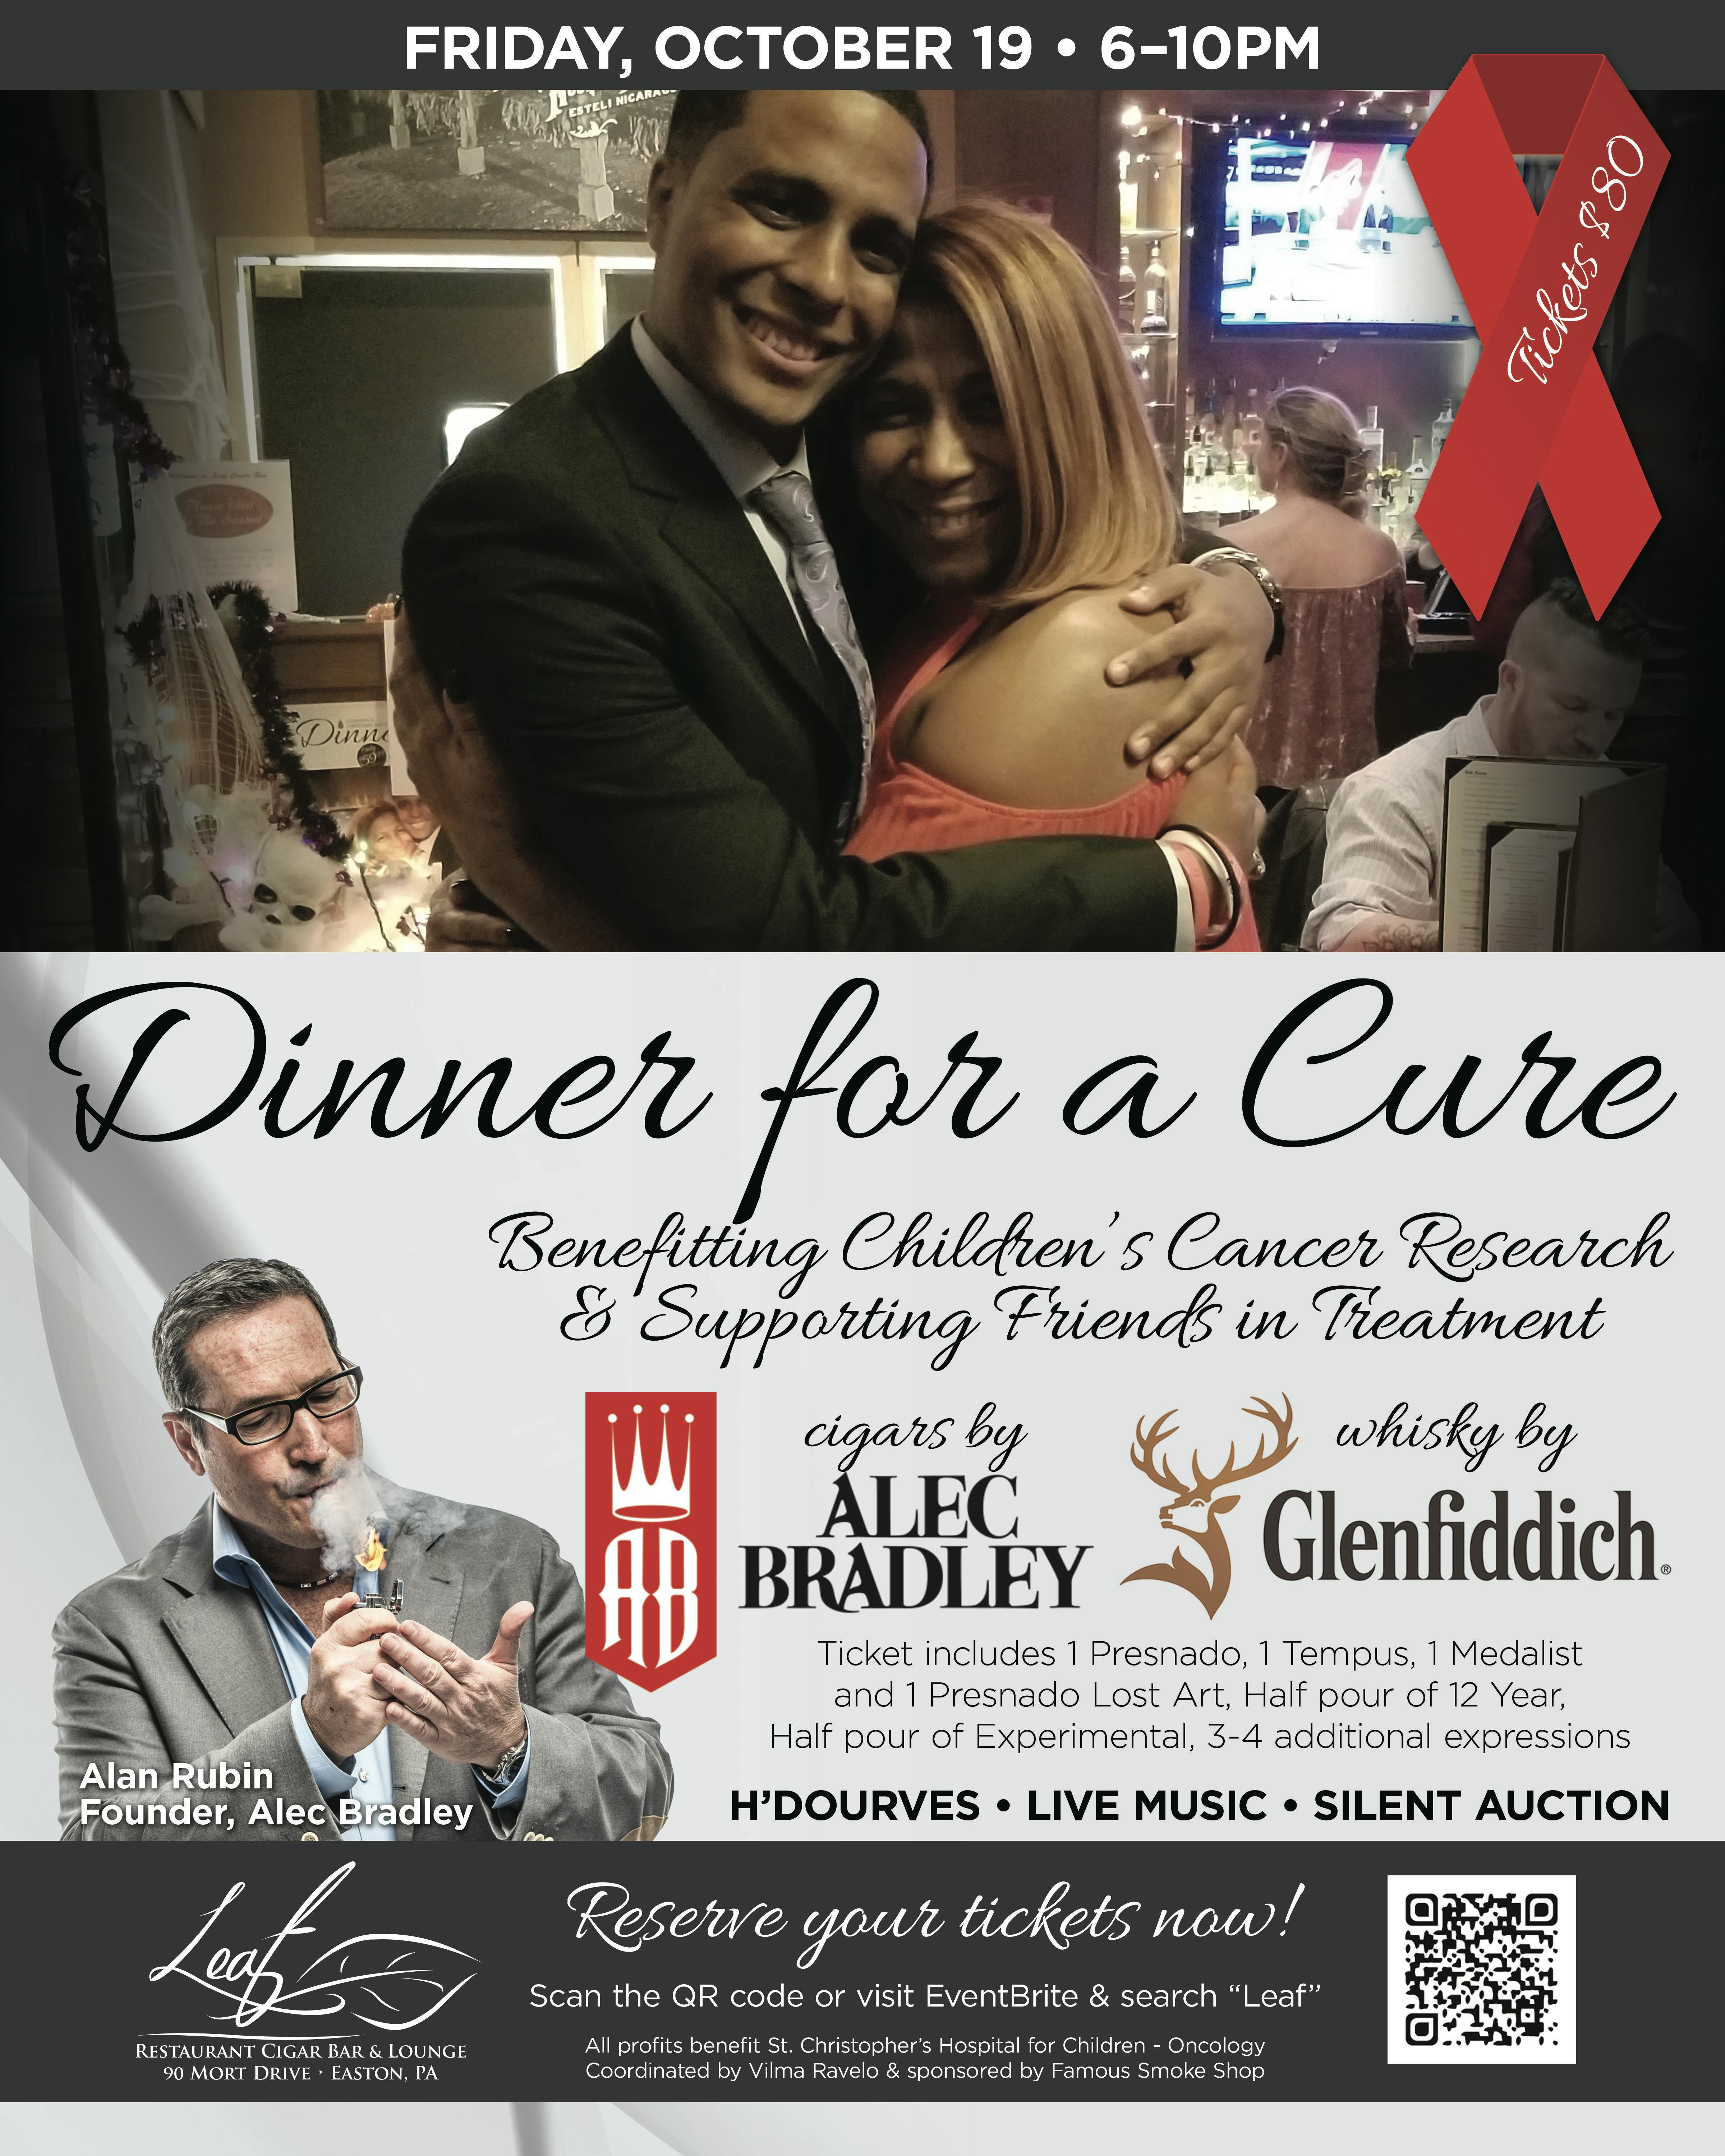 Dinner For A Cure With Alan Rubin of Alec Bradley 